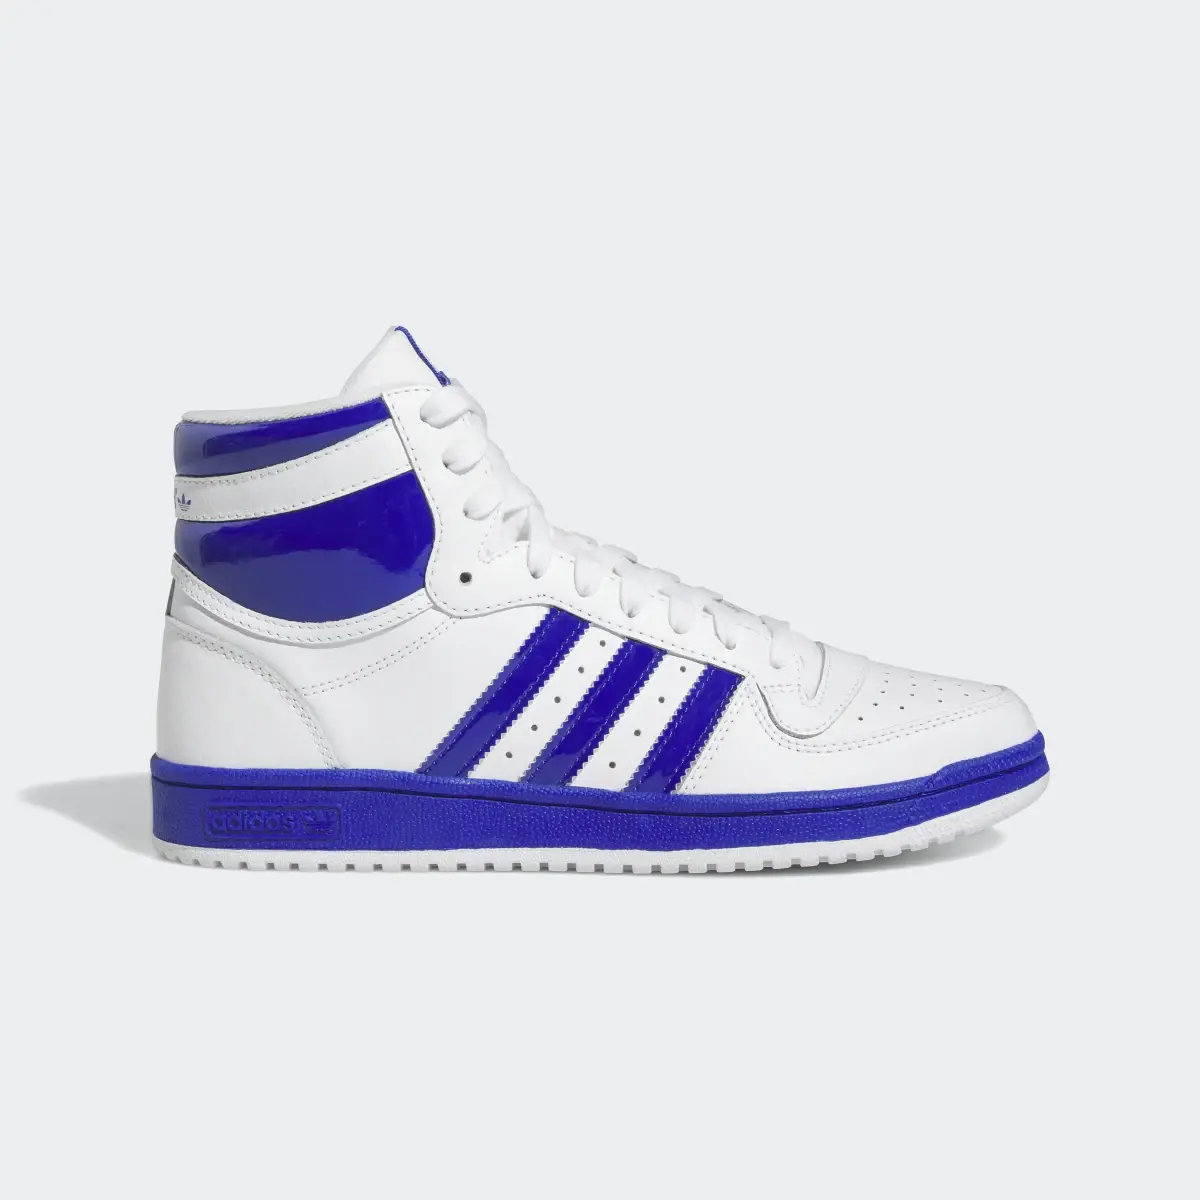 Adidas Top Ten RB Shoes. 2